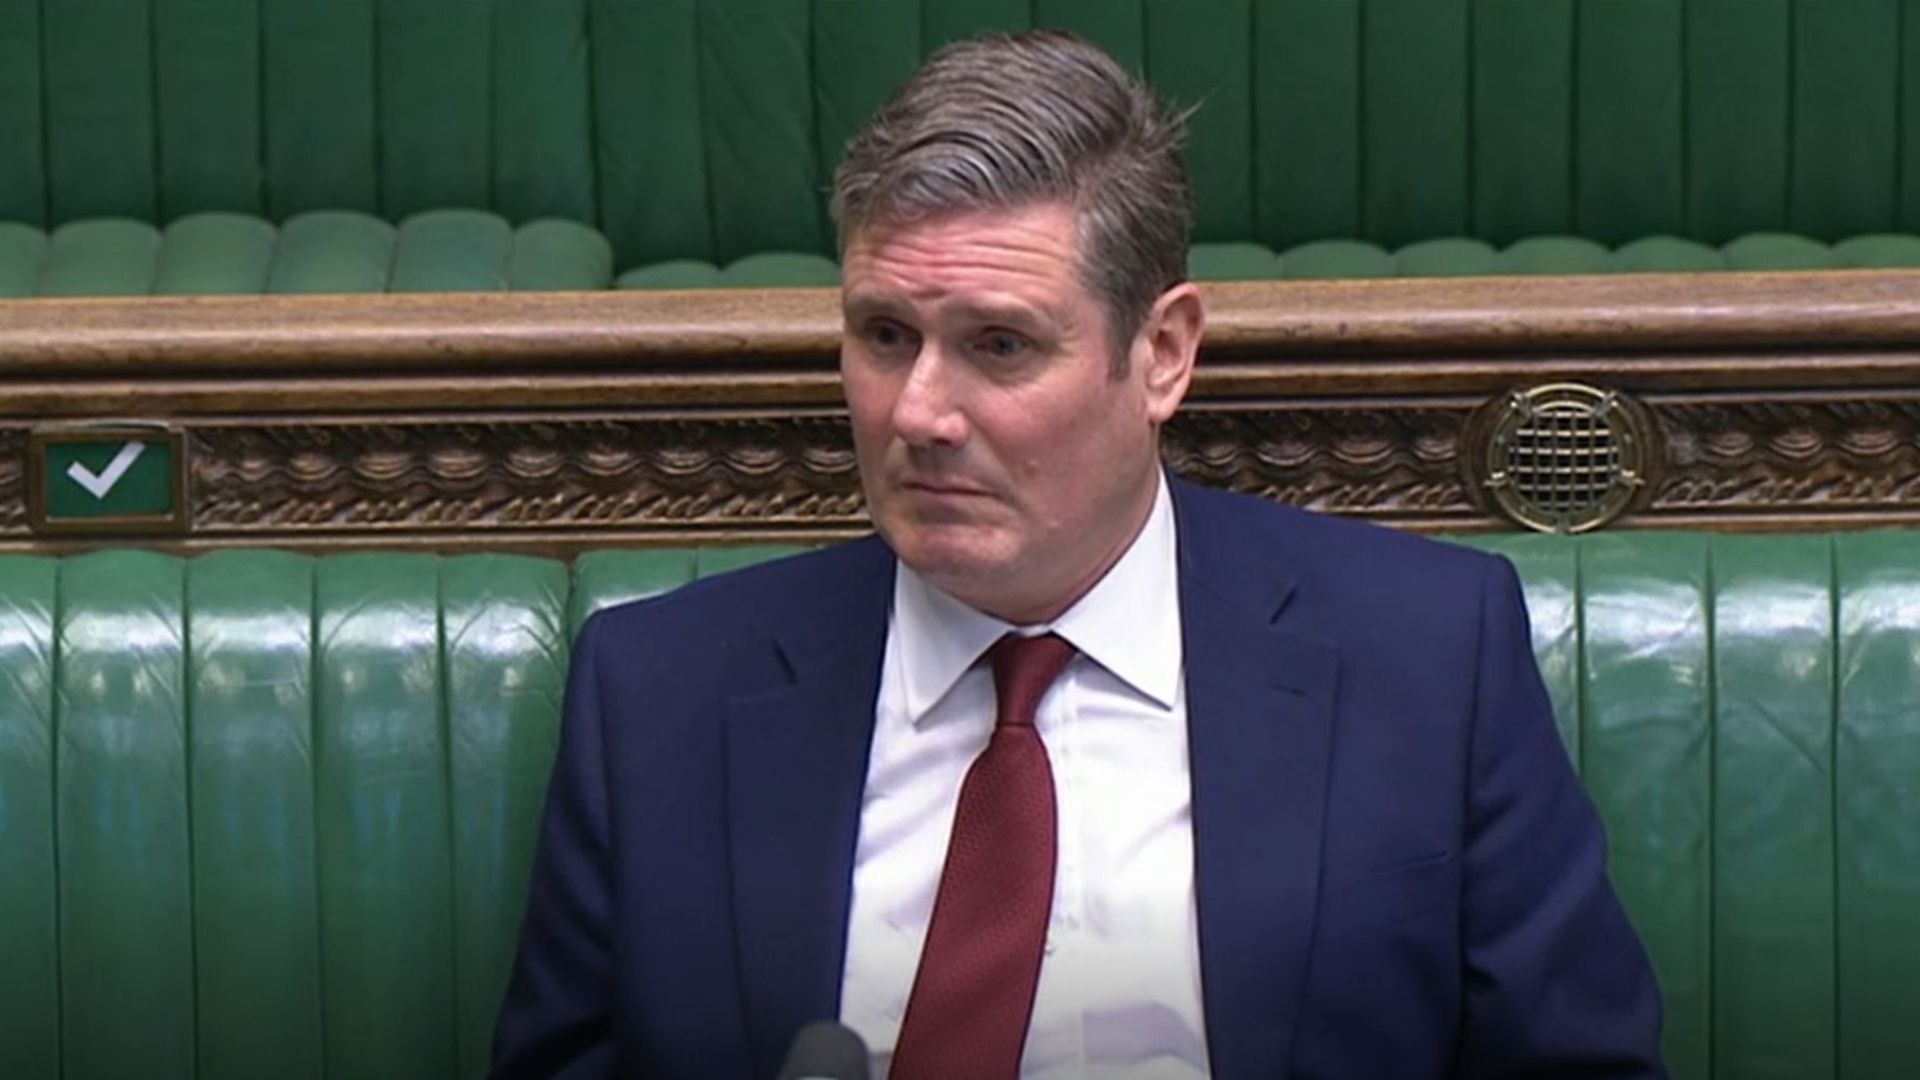 Labour leader Keir Starmer during Prime Minister's Questions in the House of Commons, London. - Credit: PA